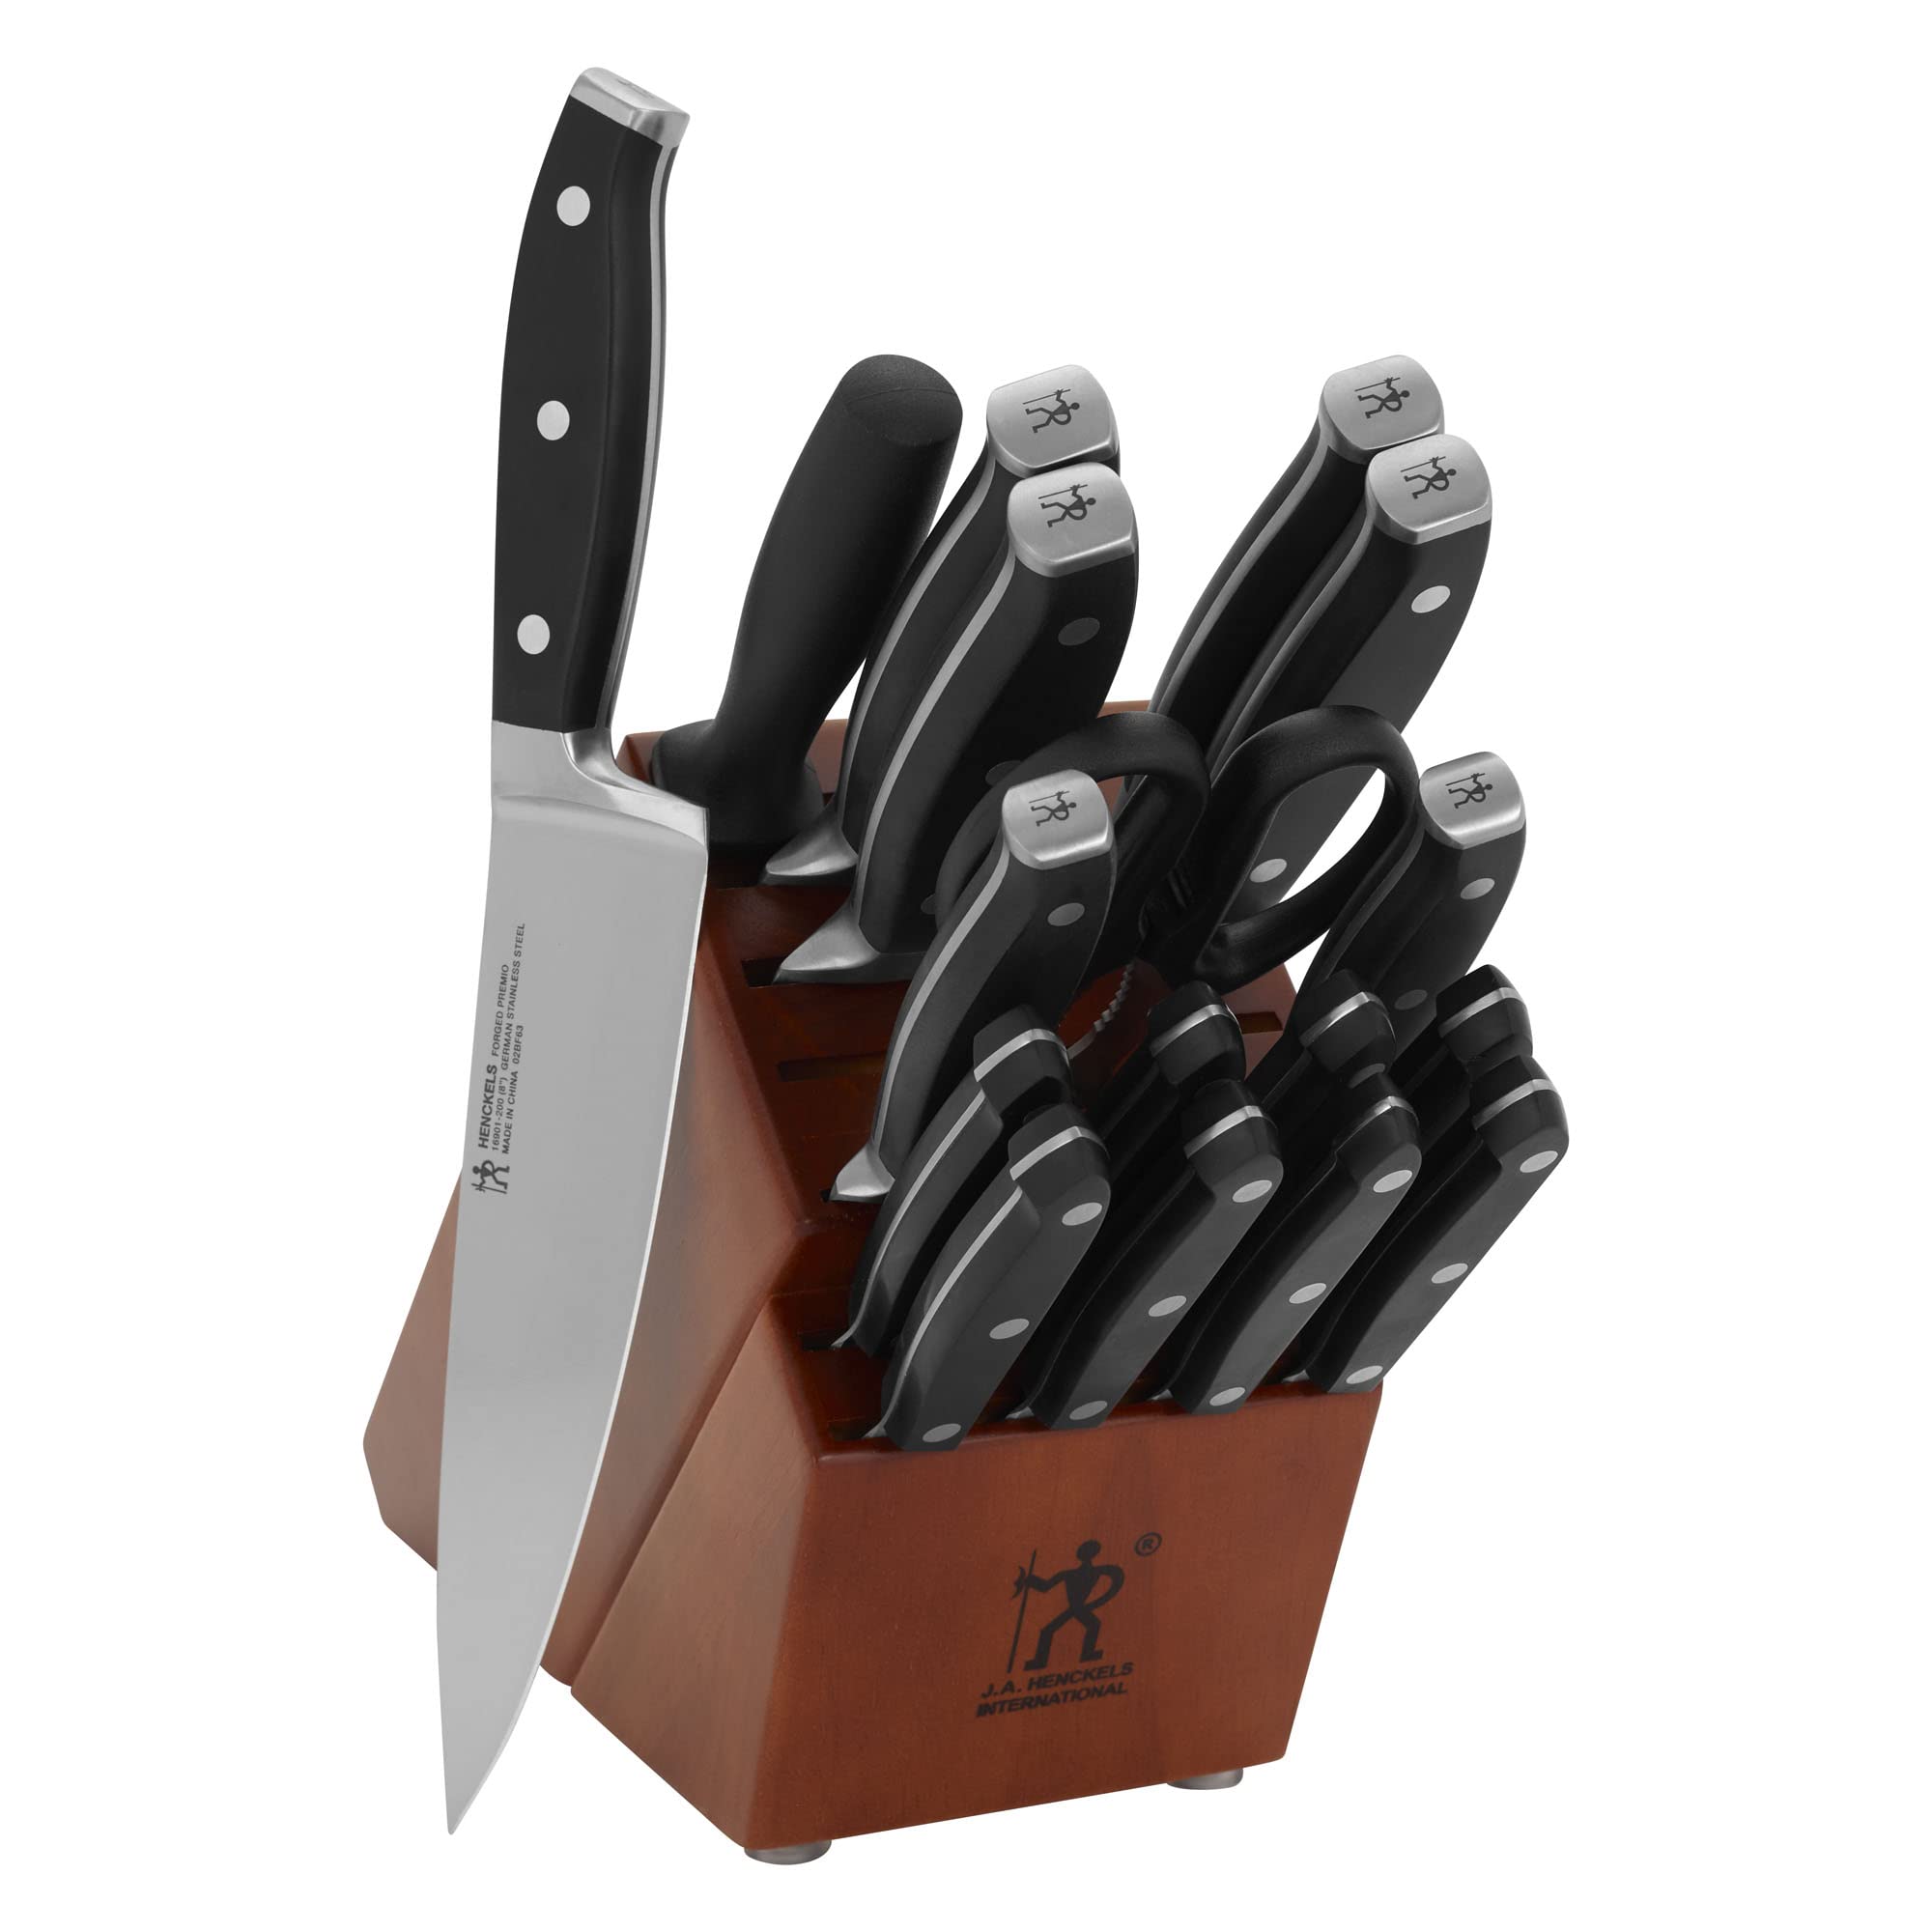 Enoking 15 Pieces Kitchen Knife Set With Wooden Block and Sharpener - for  sale online